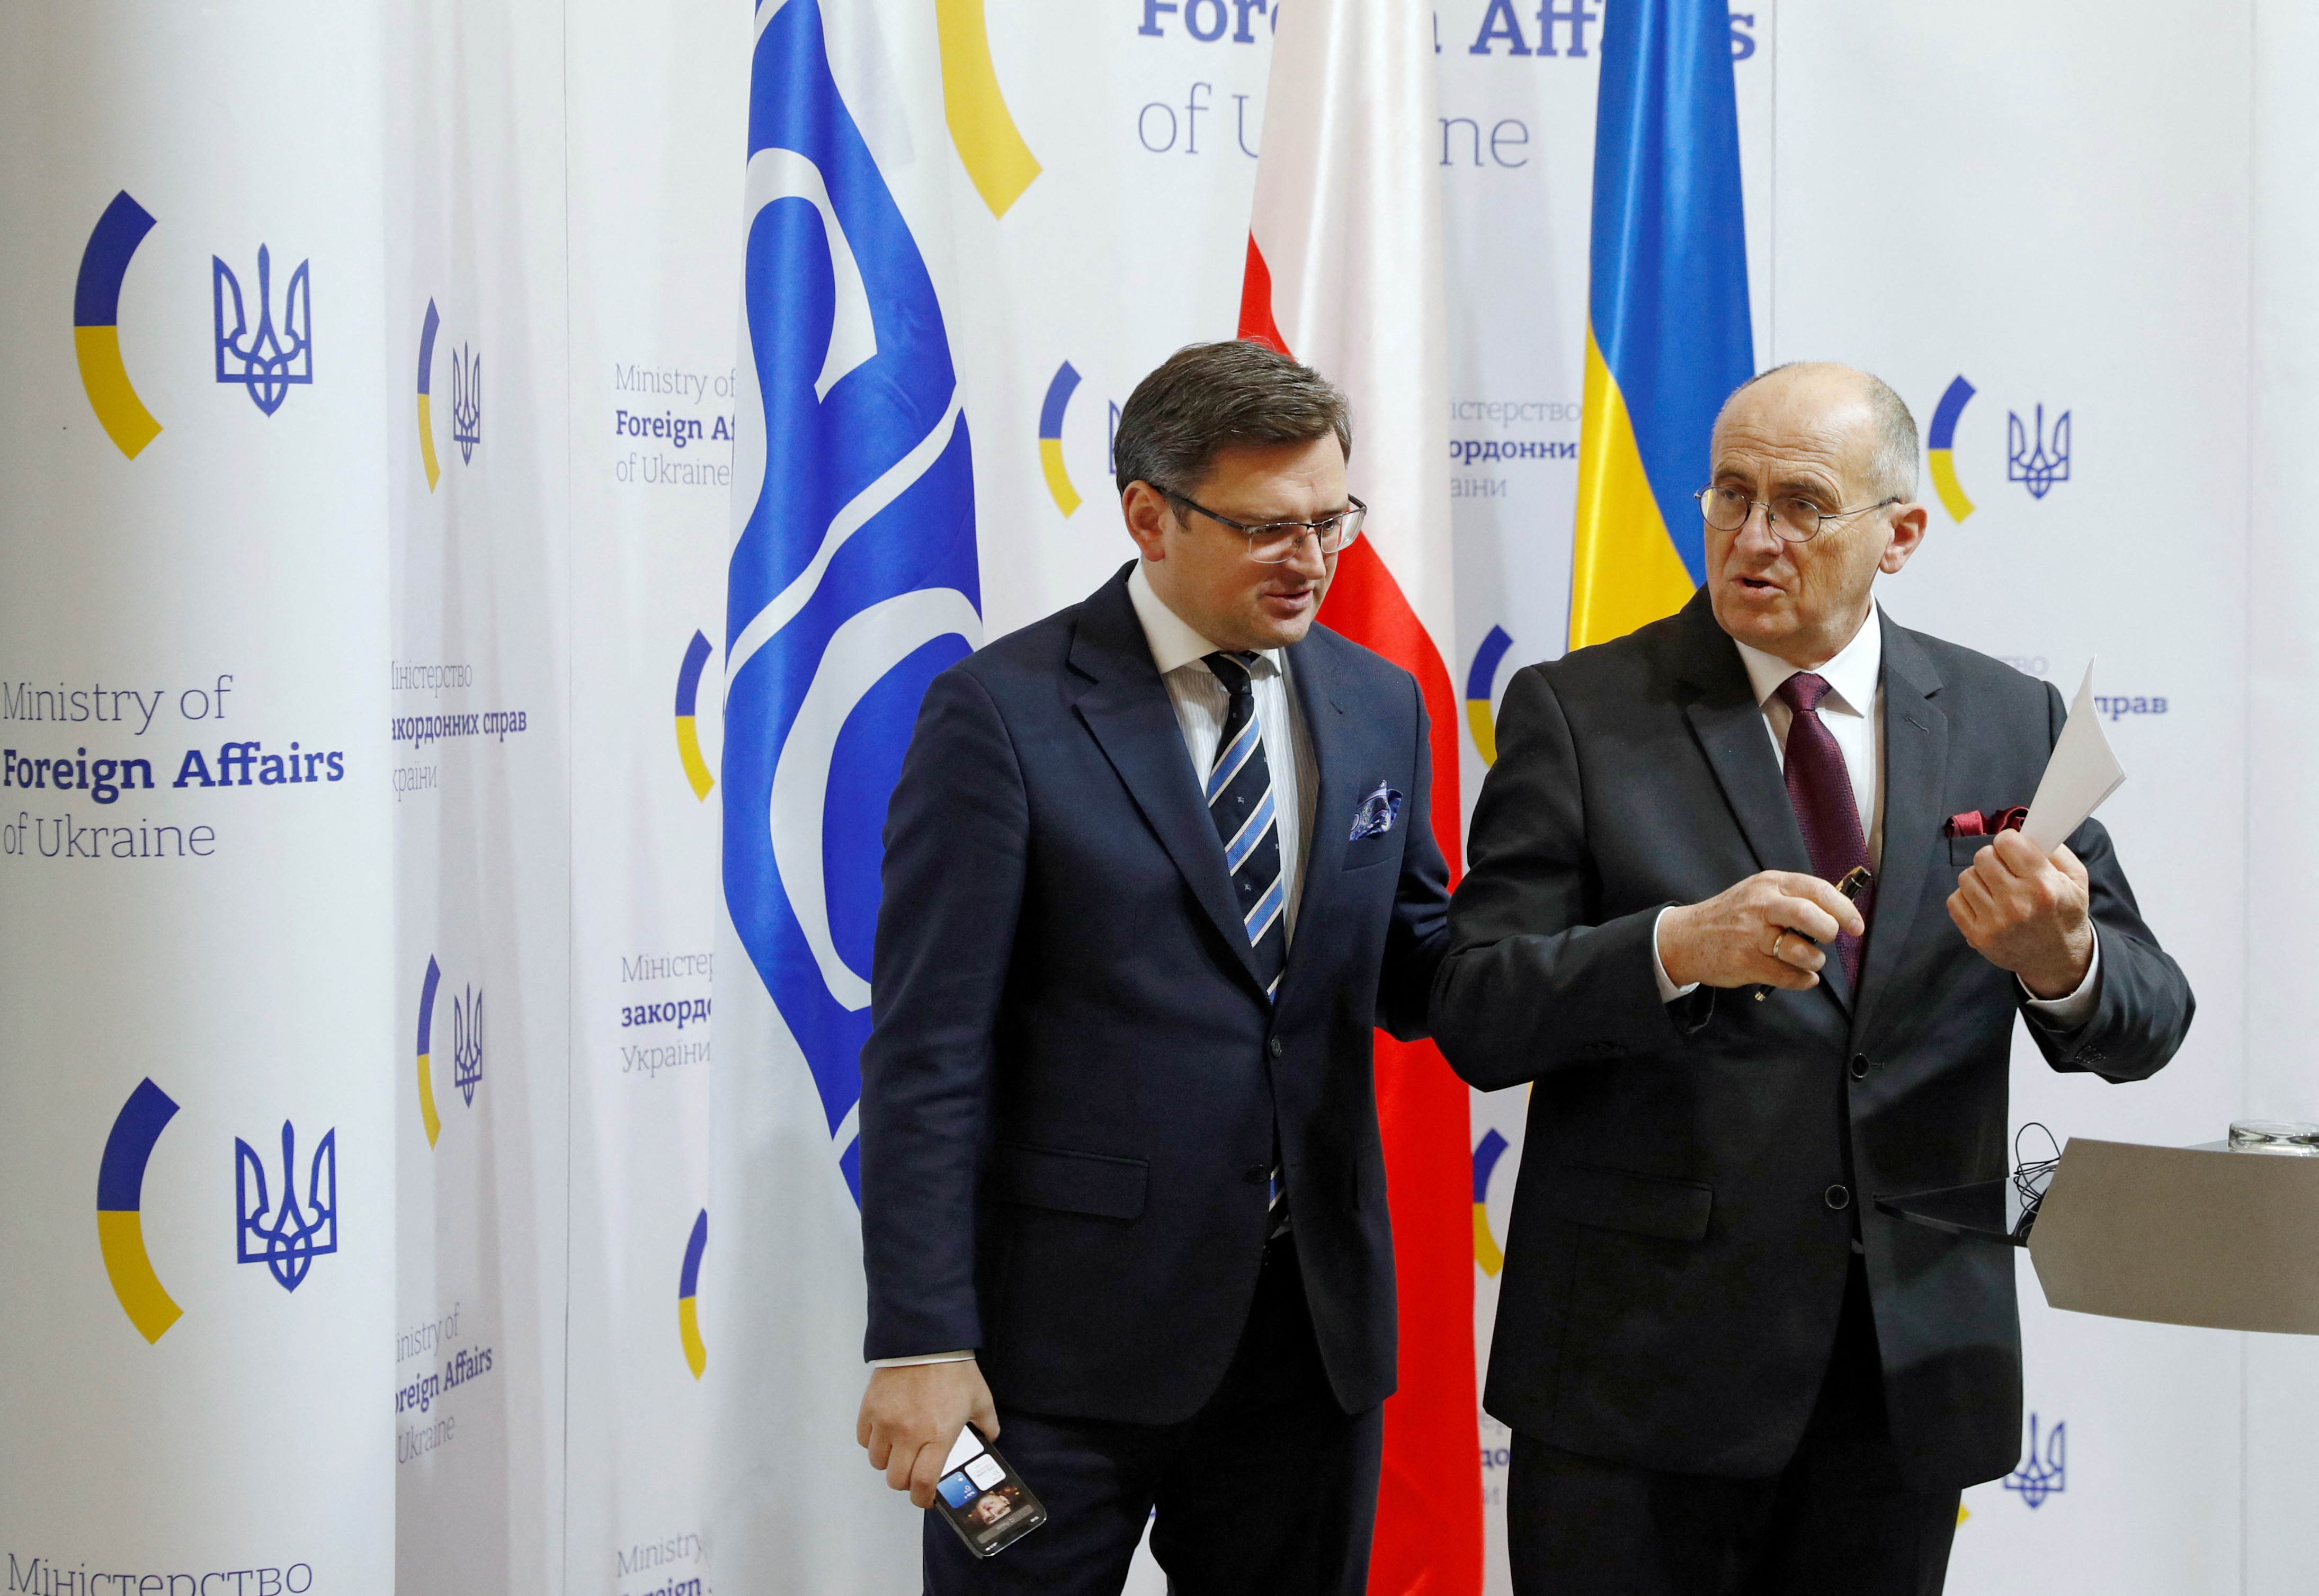 Ukrainian Foreign Minister Dmytro Kuleba, left, and Chairman of OSCE and Polish Foreign Minister Zbigniew Rau in Kyiv, Ukraine, on February 10.